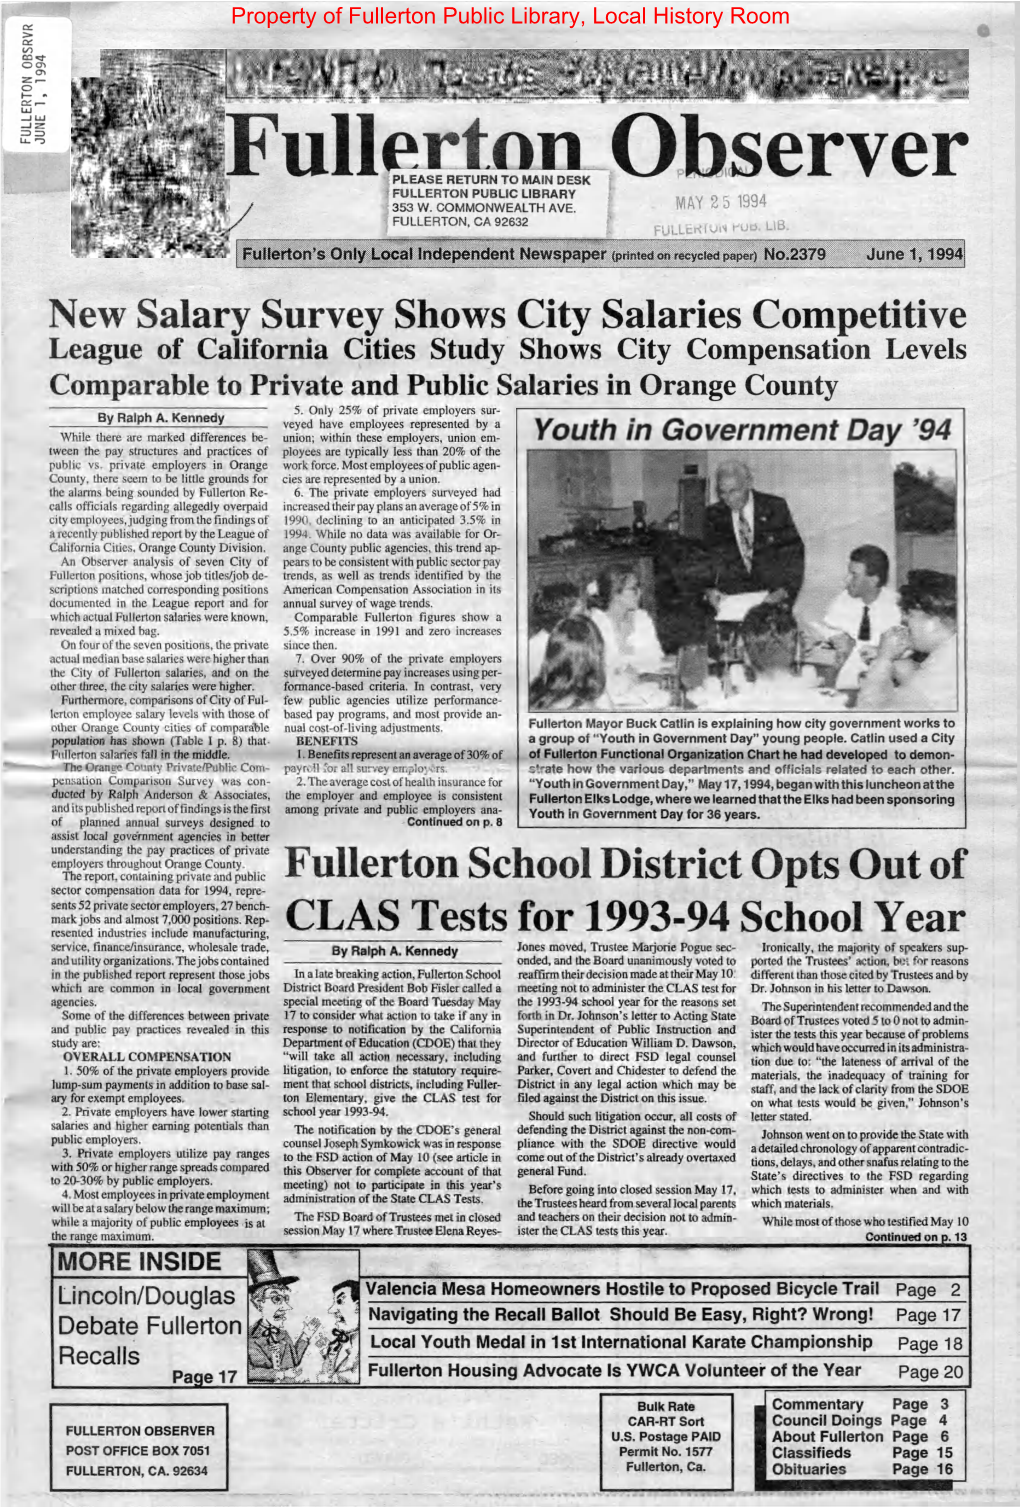 FULLERTON OBSERVER NEWS June 1,1994 Valencia Mesa Homeowners Hostile to Planned Bicycle Trail by Ralph A